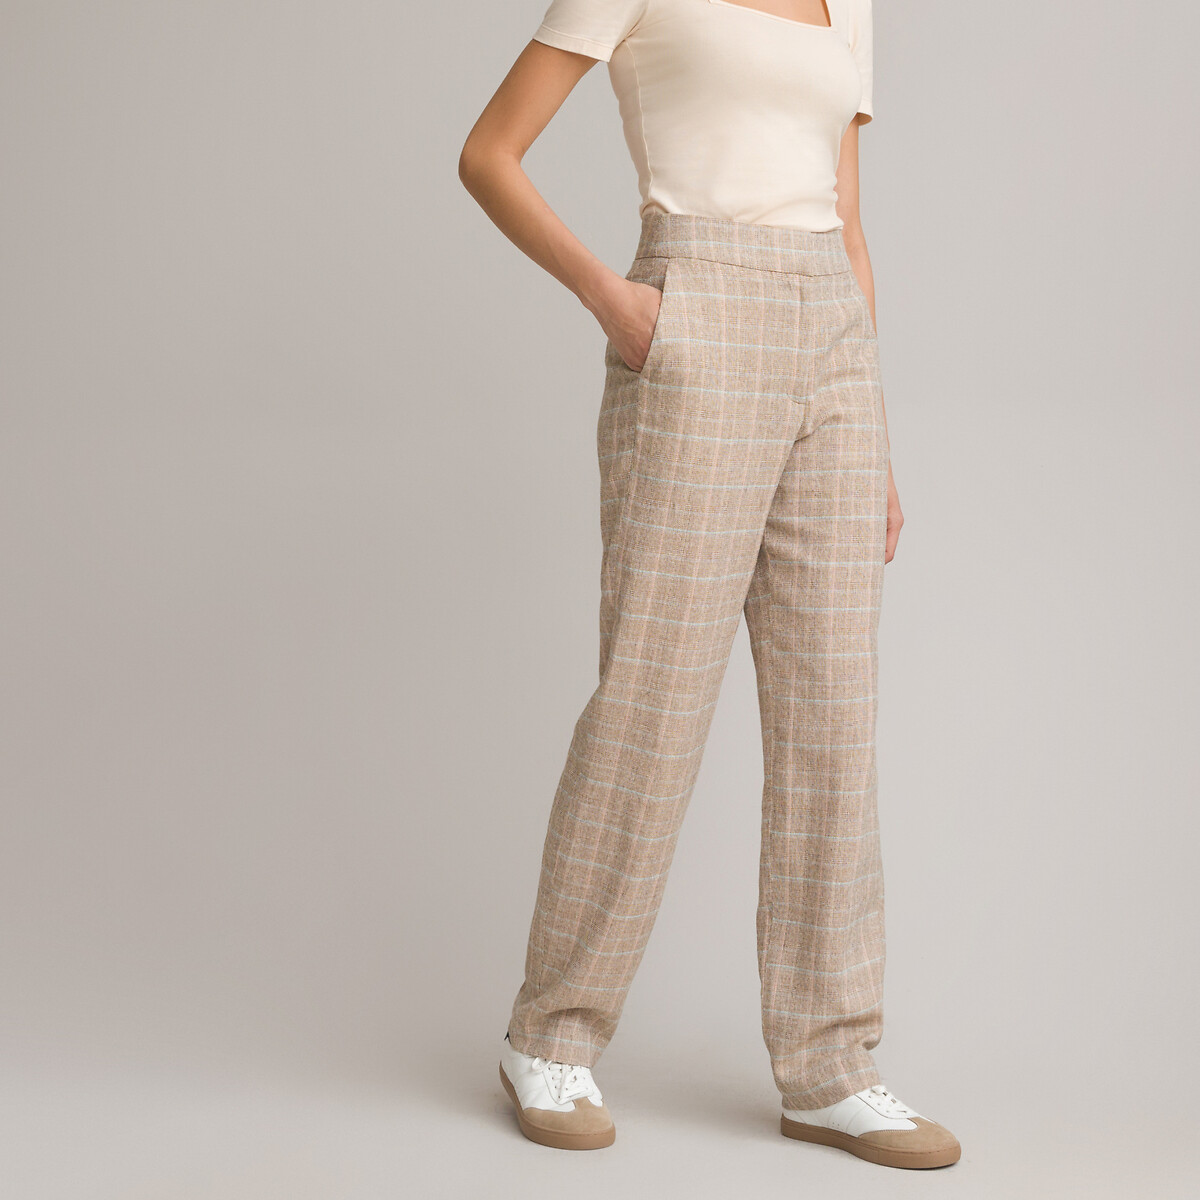 Ladies Trousers  Trousers for Women  hush